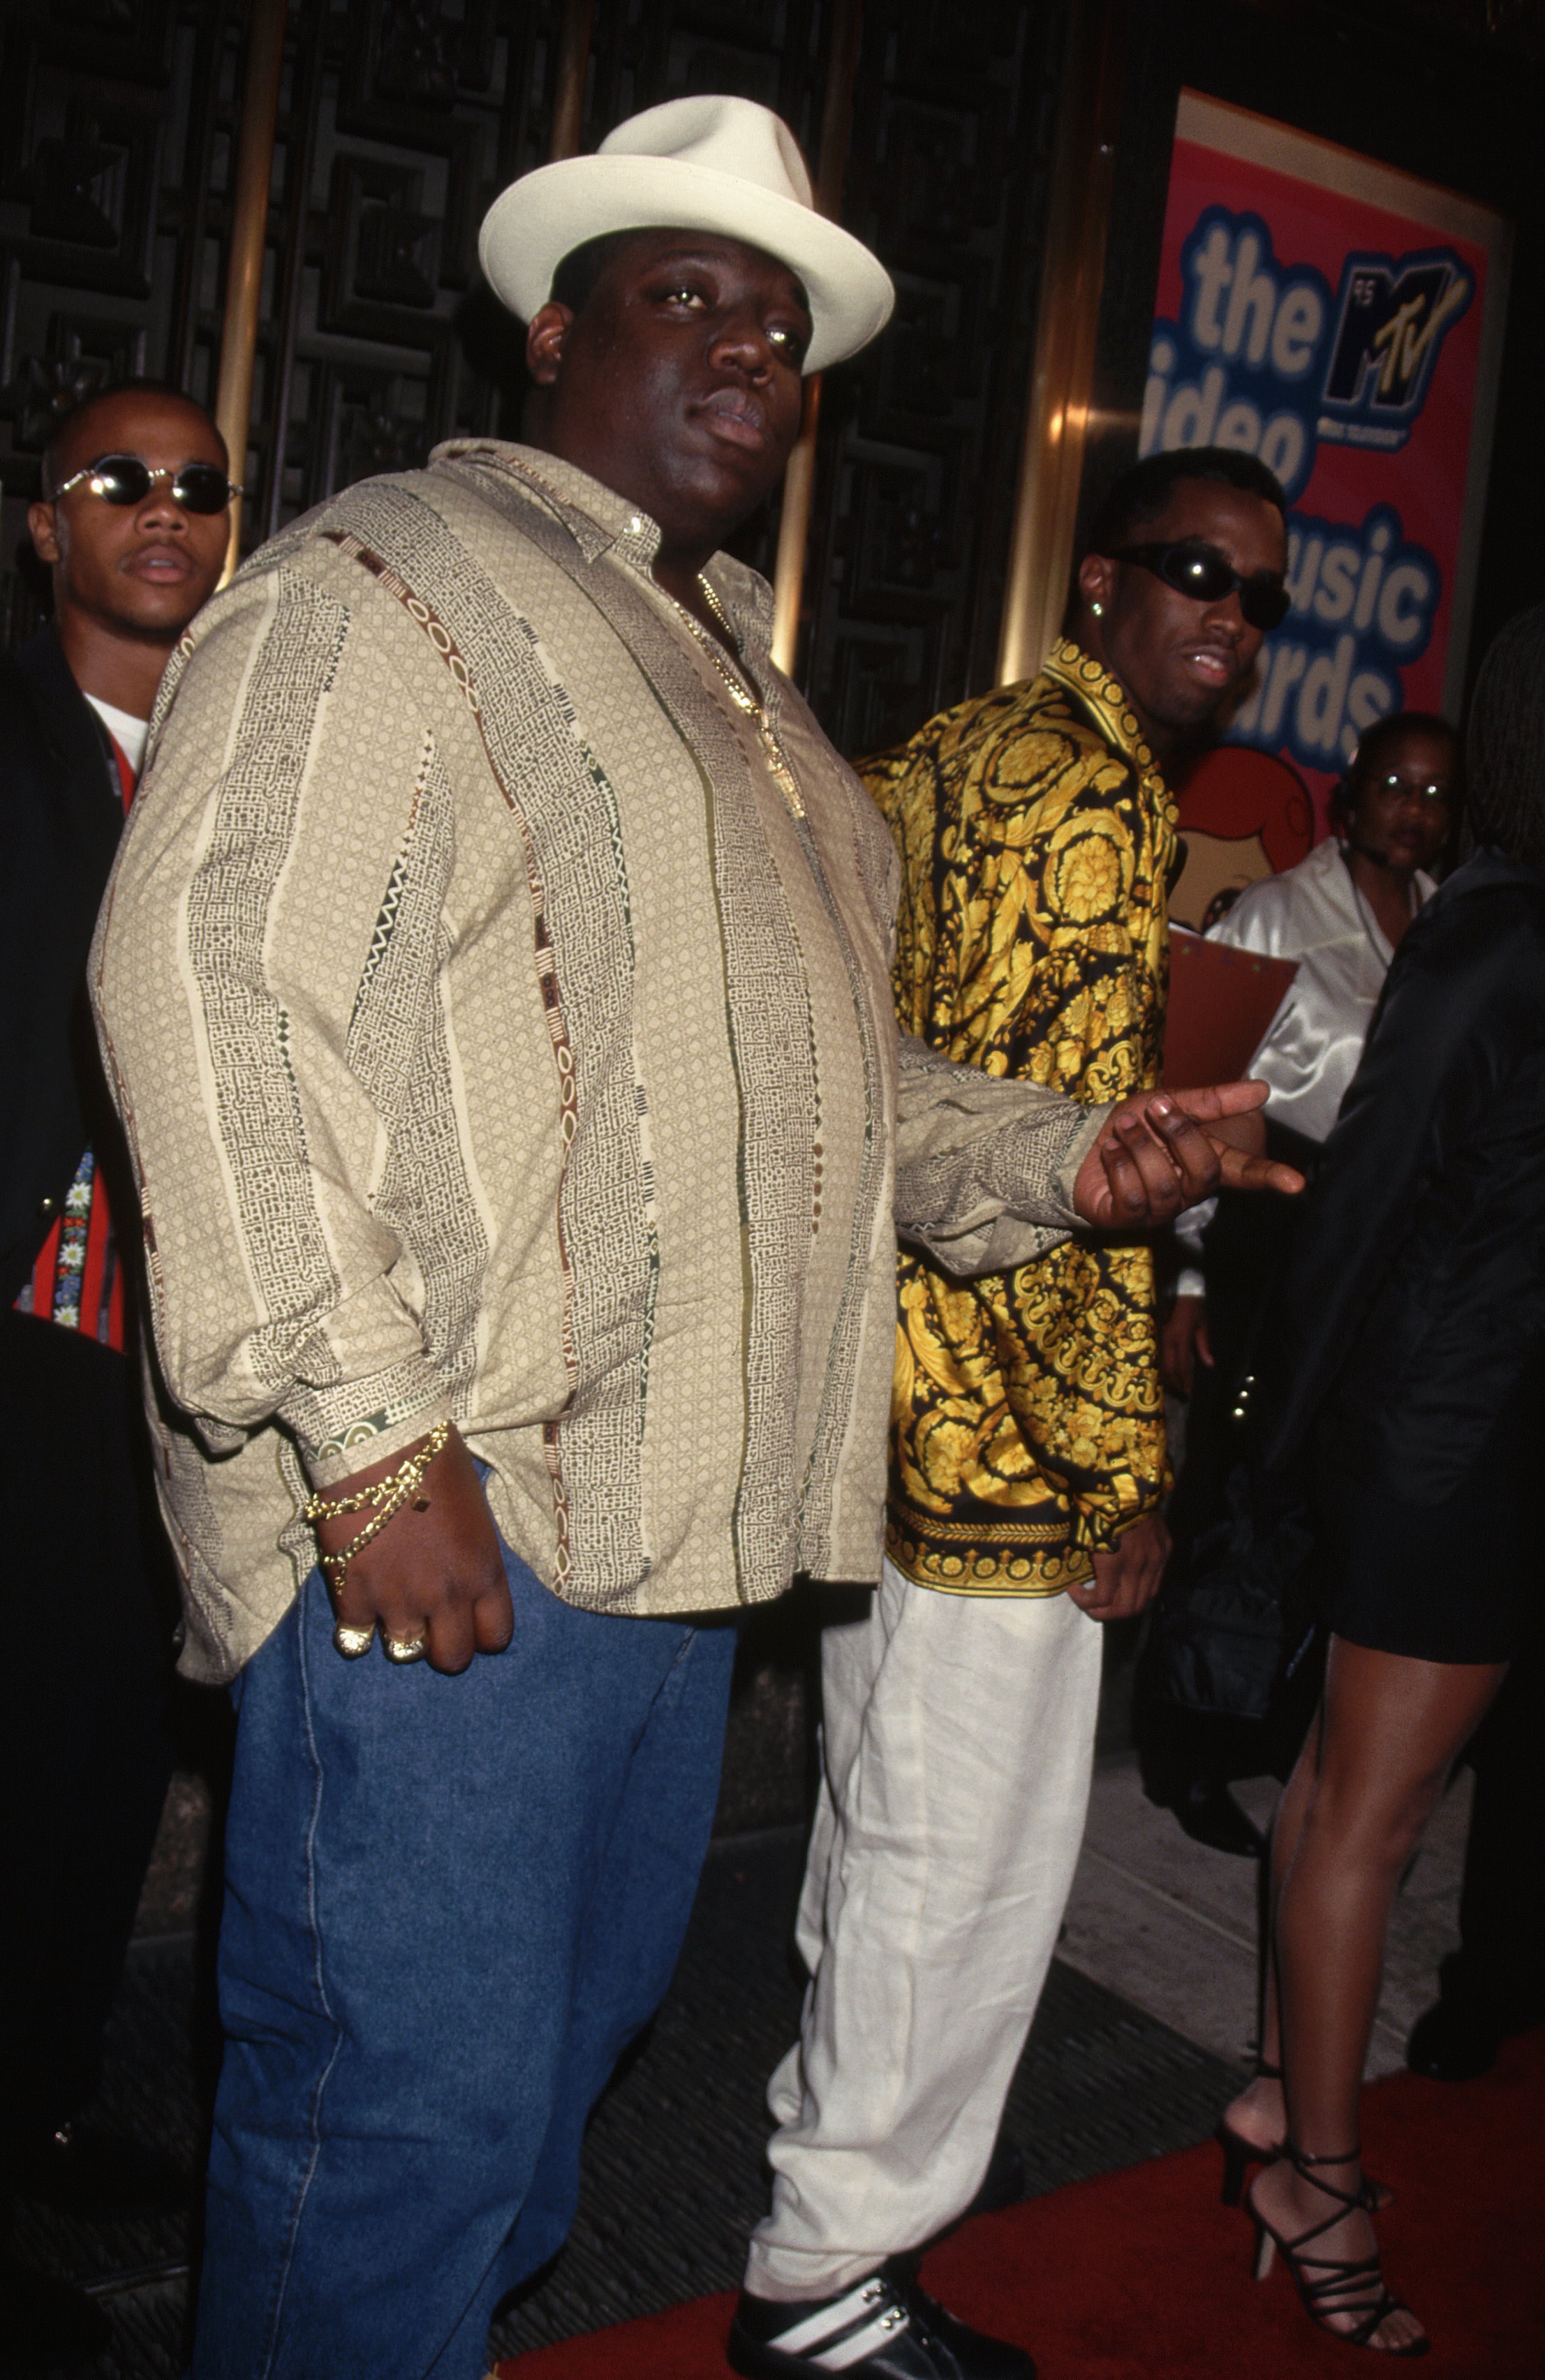 The Notorious BIG, P. Diddy